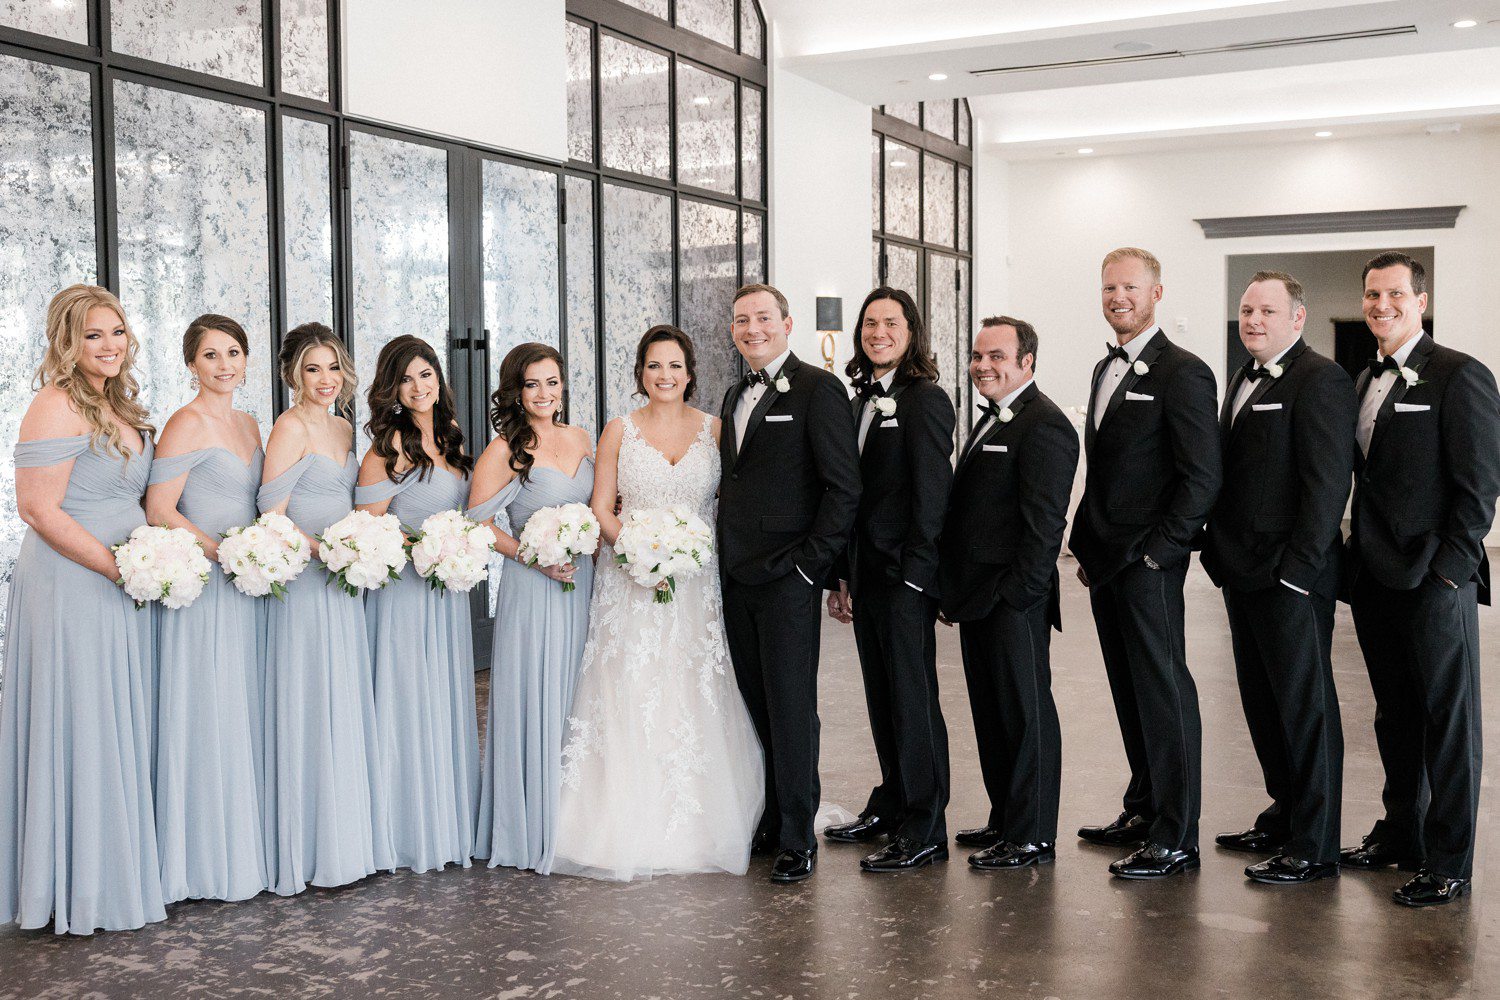 Wedding Party Photos at The Revaire